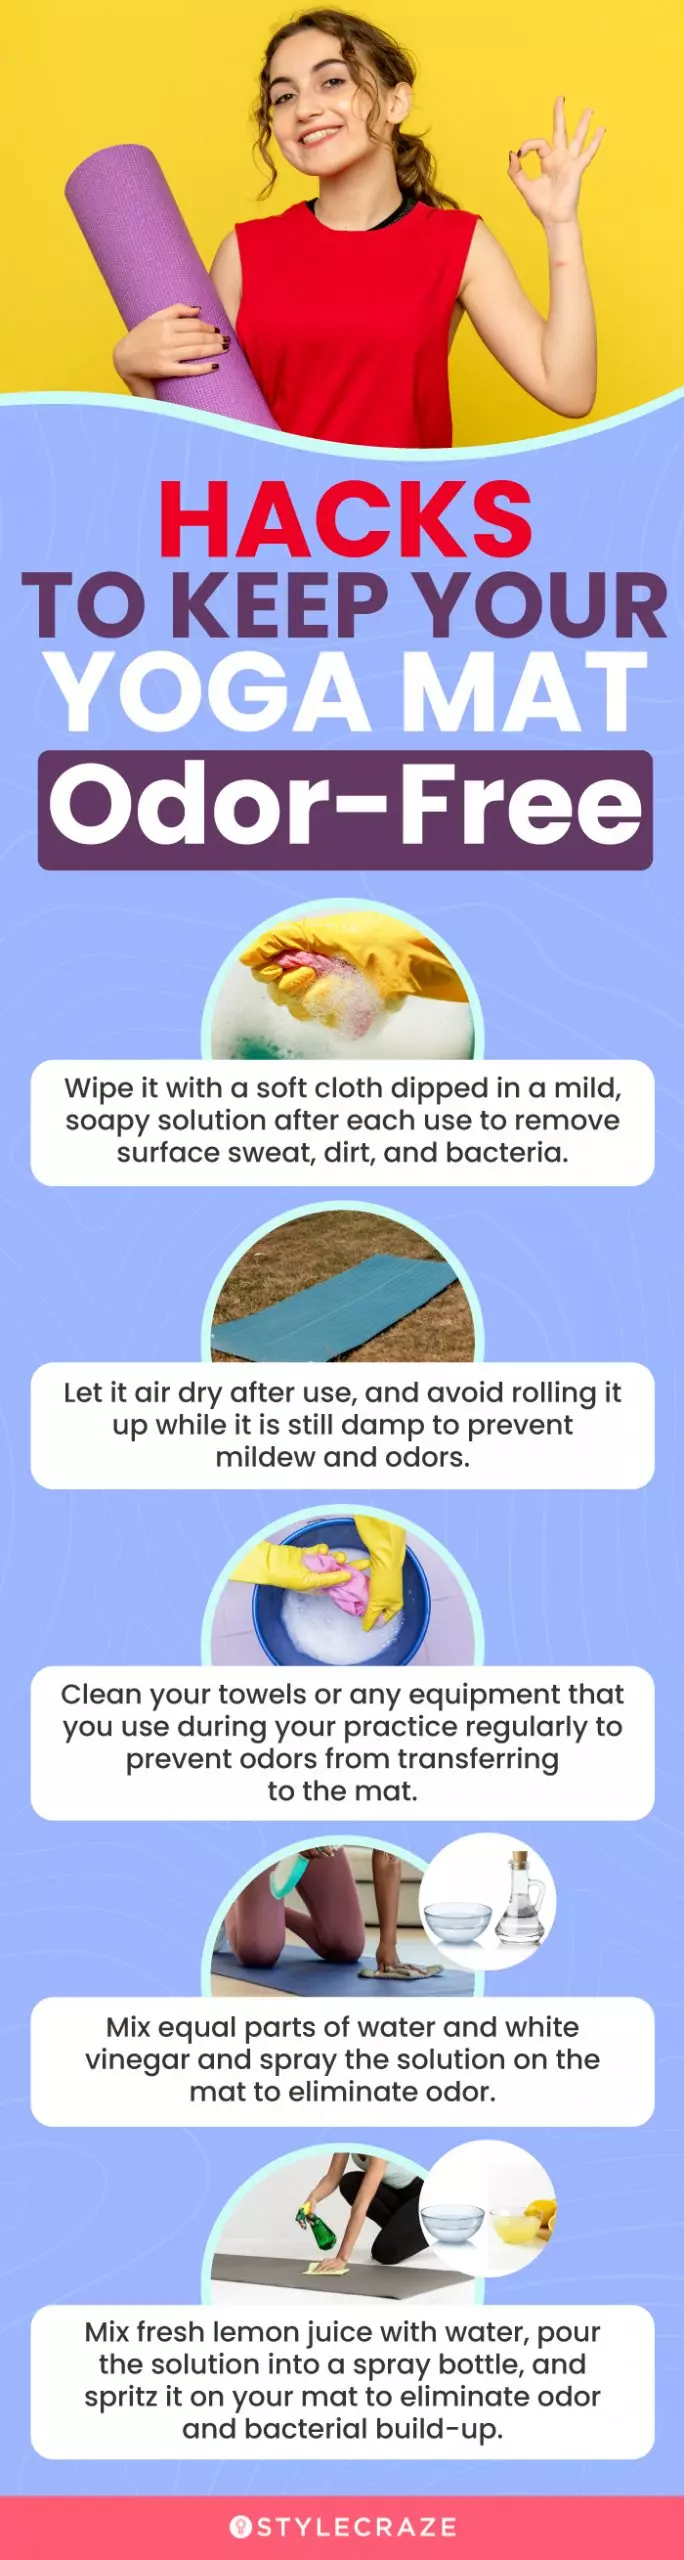 Hacks To Keep Your Yoga Mat Odor-Free(infographic)